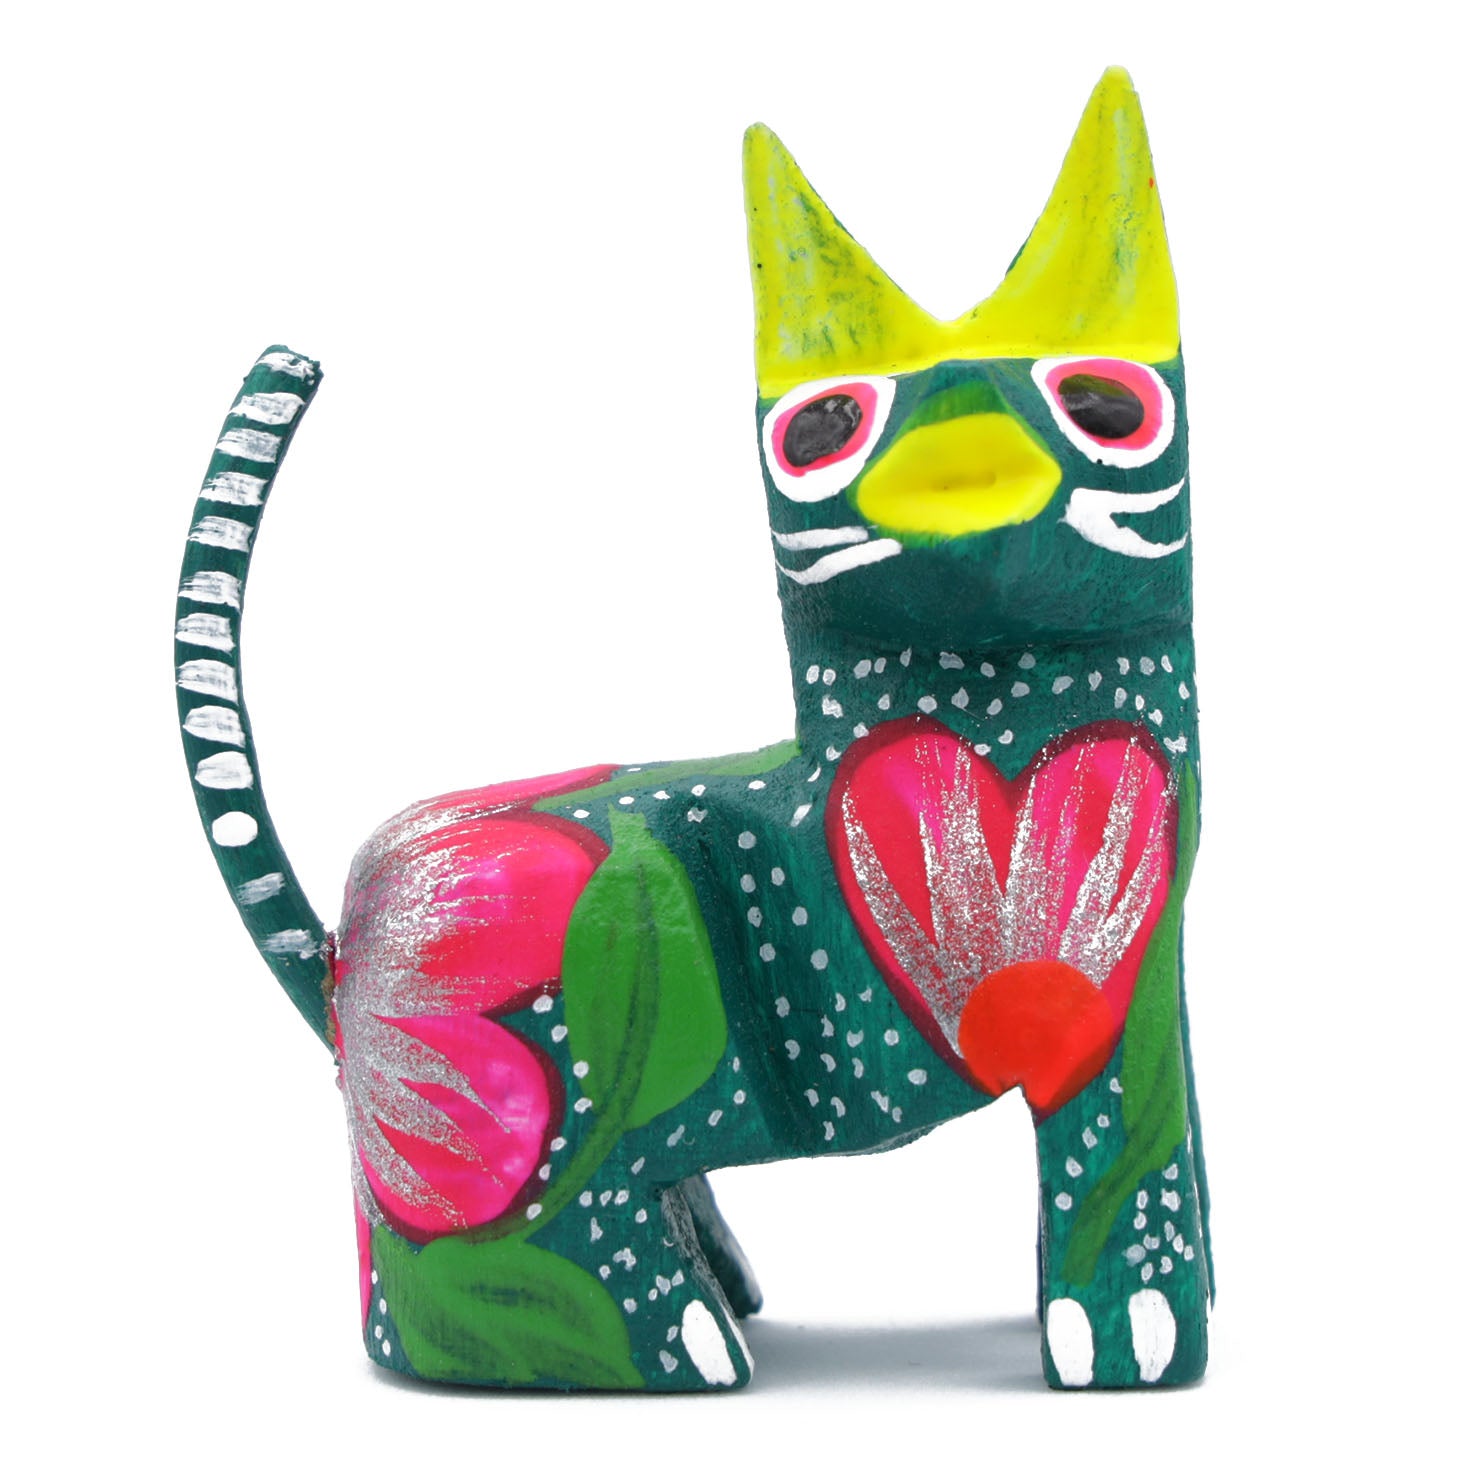 Hand Painted Sitting Cat Wooden Figurine